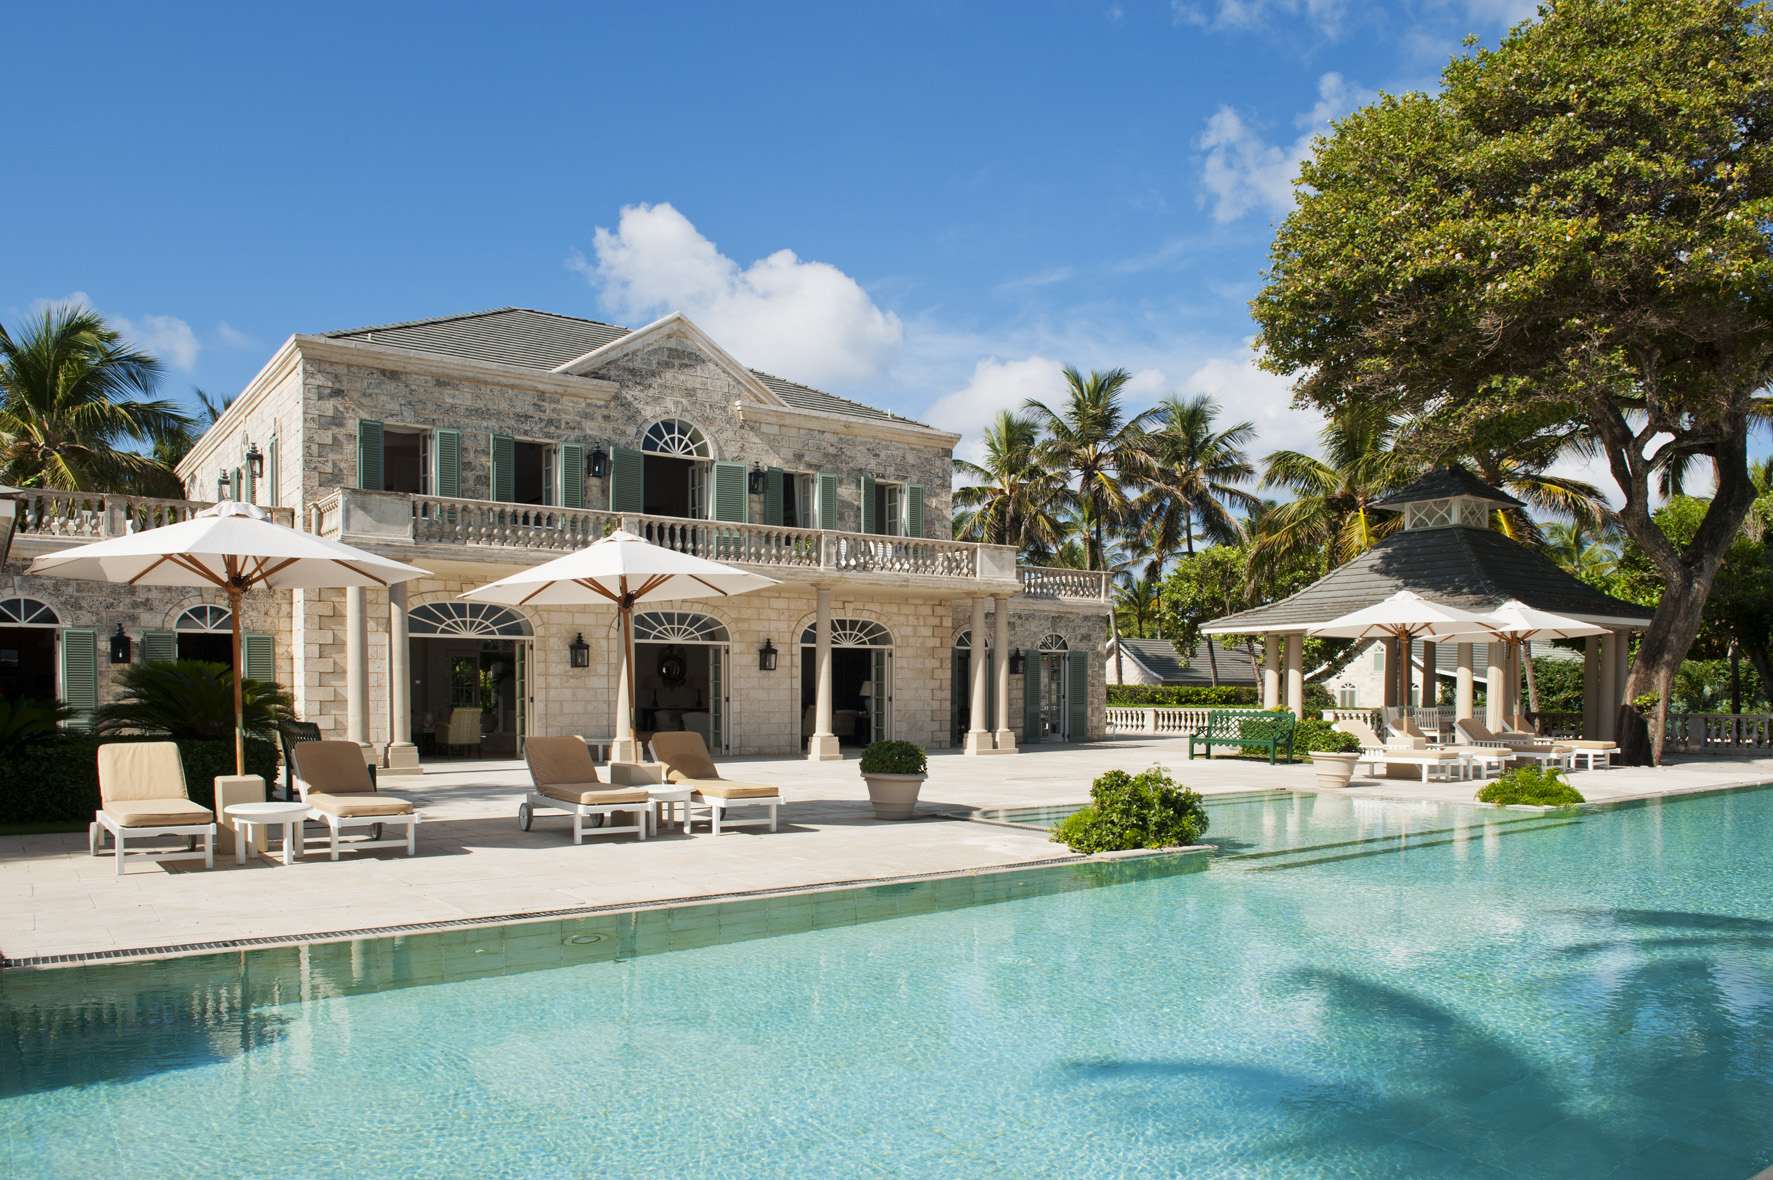 Swimming pool and facade of Palm Beach, Mustique